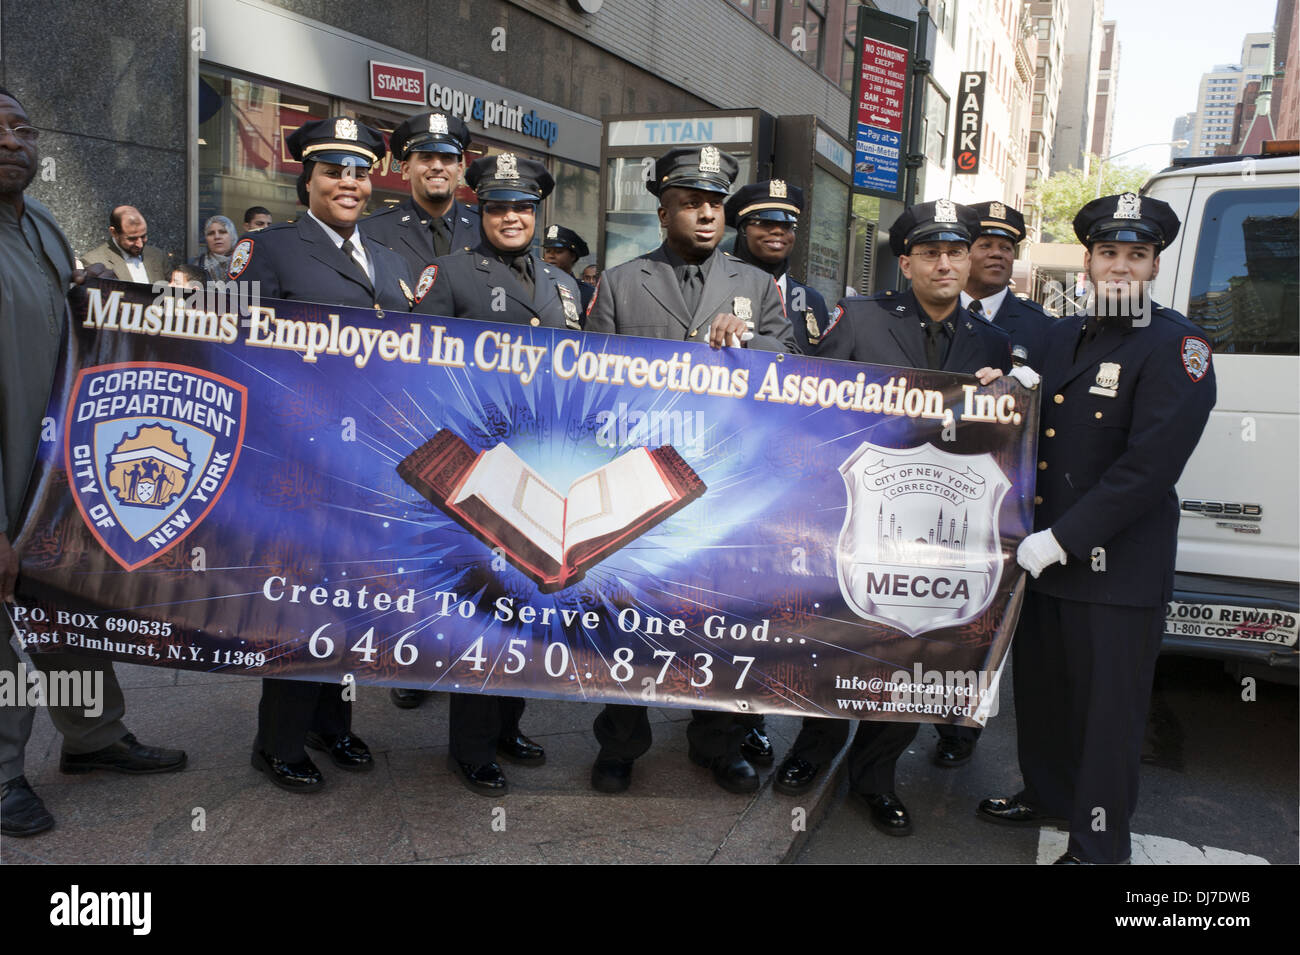 NY Department of Corrections officers get ready to march in the Annual Muslim Day Parade, New York City, 2012. Stock Photo